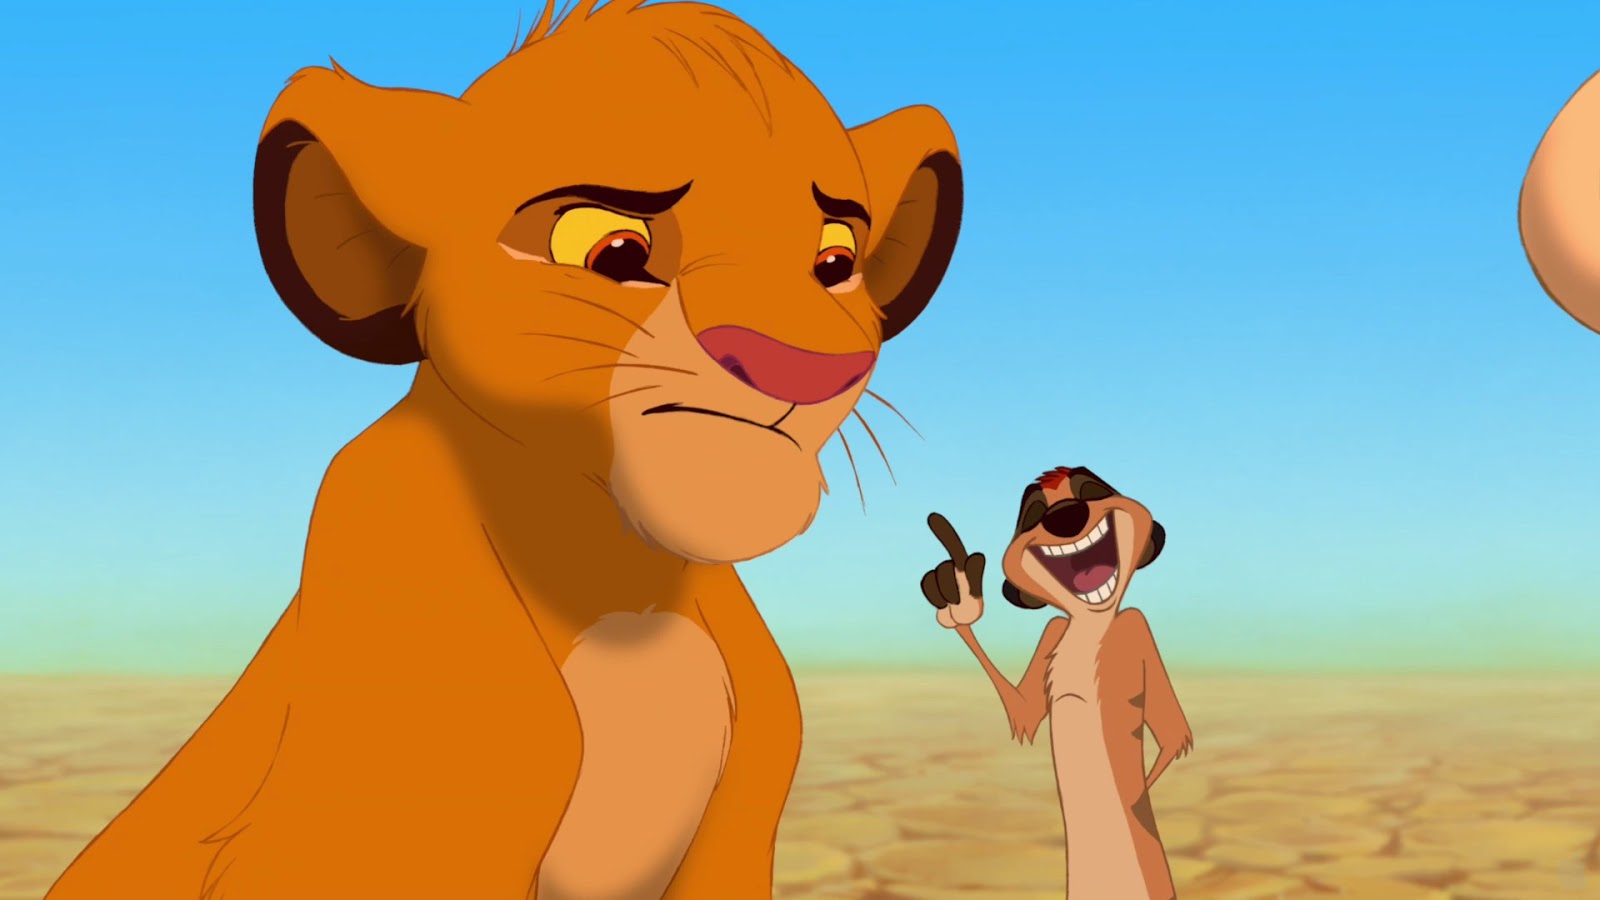 Music N' More: The Lion King